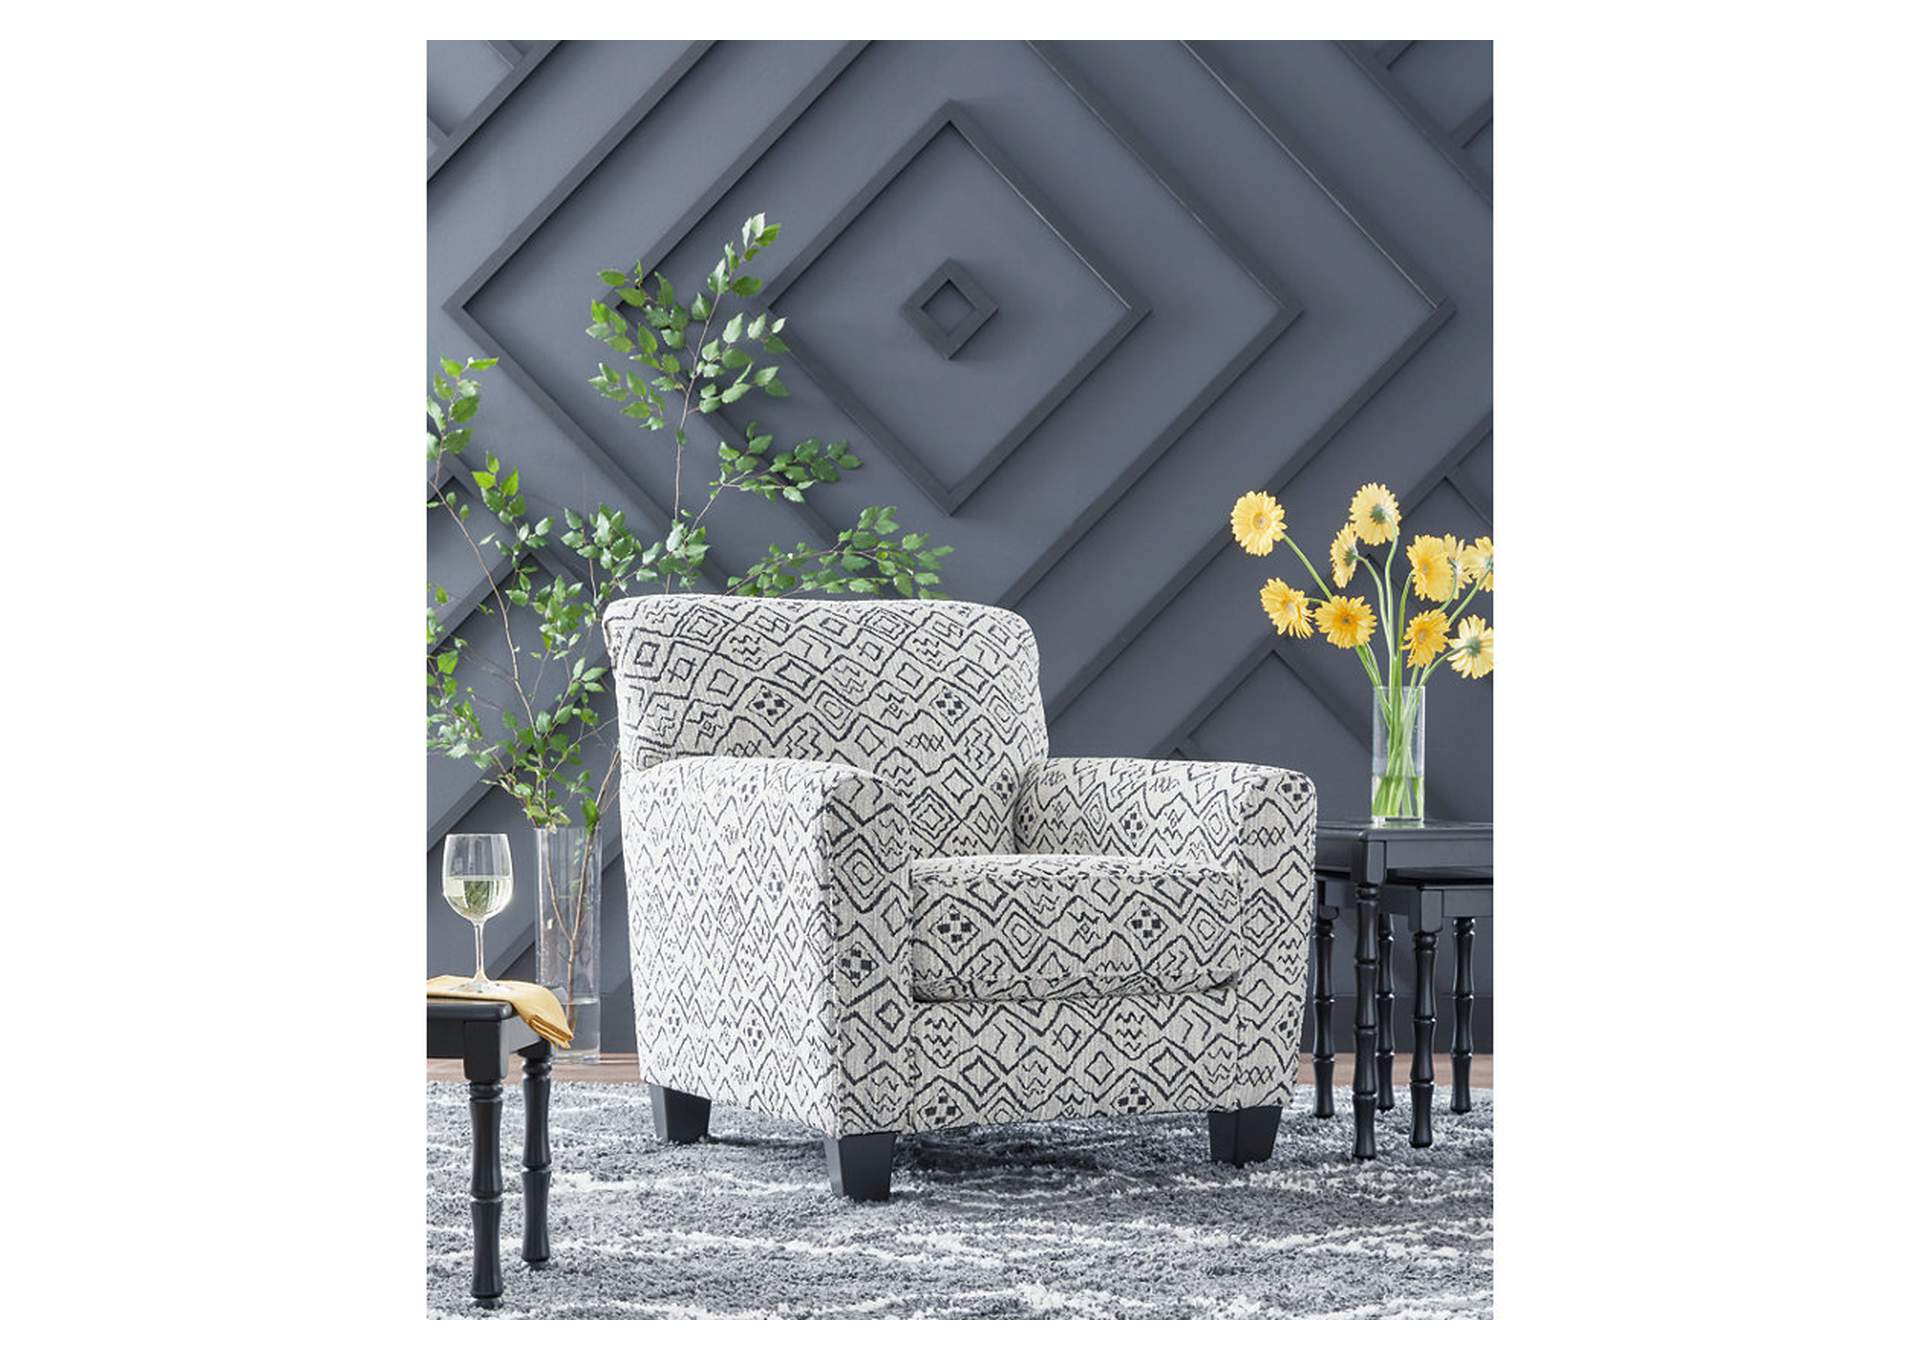 Hayesdale Accent Chair,Signature Design By Ashley